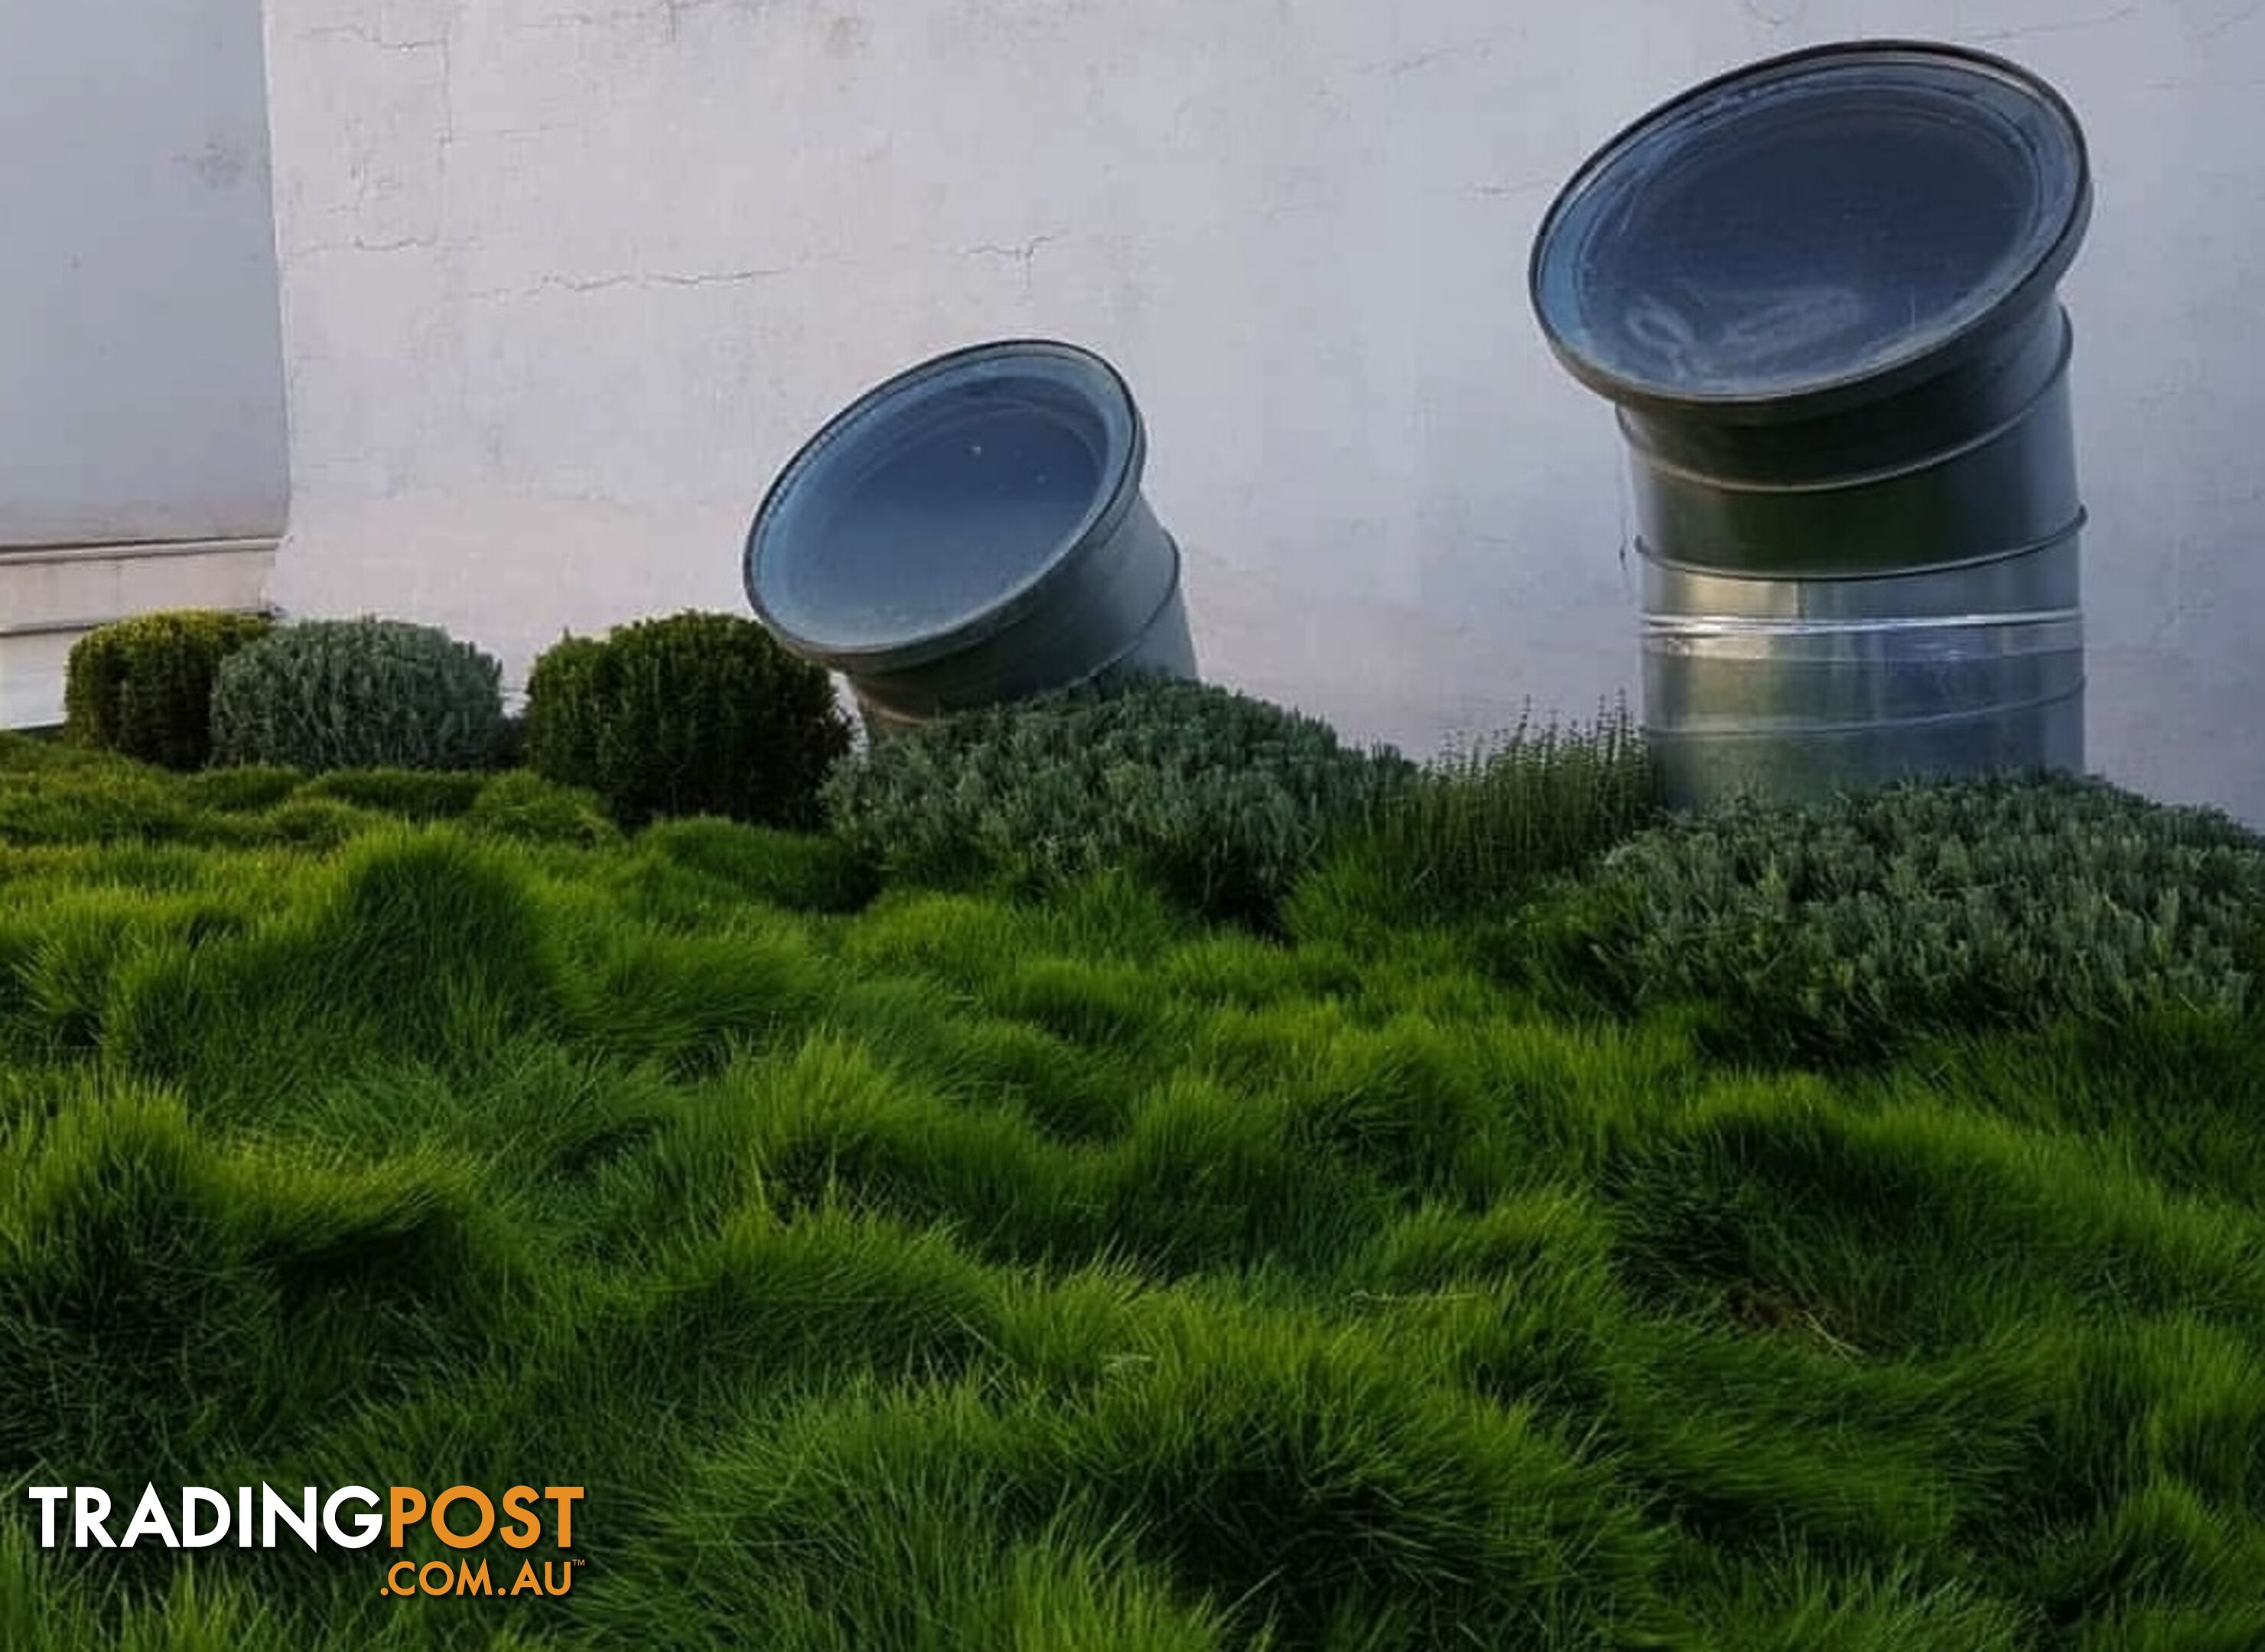 Petting Grass Special -  10 x 100mm pots - $70.00 including delivery